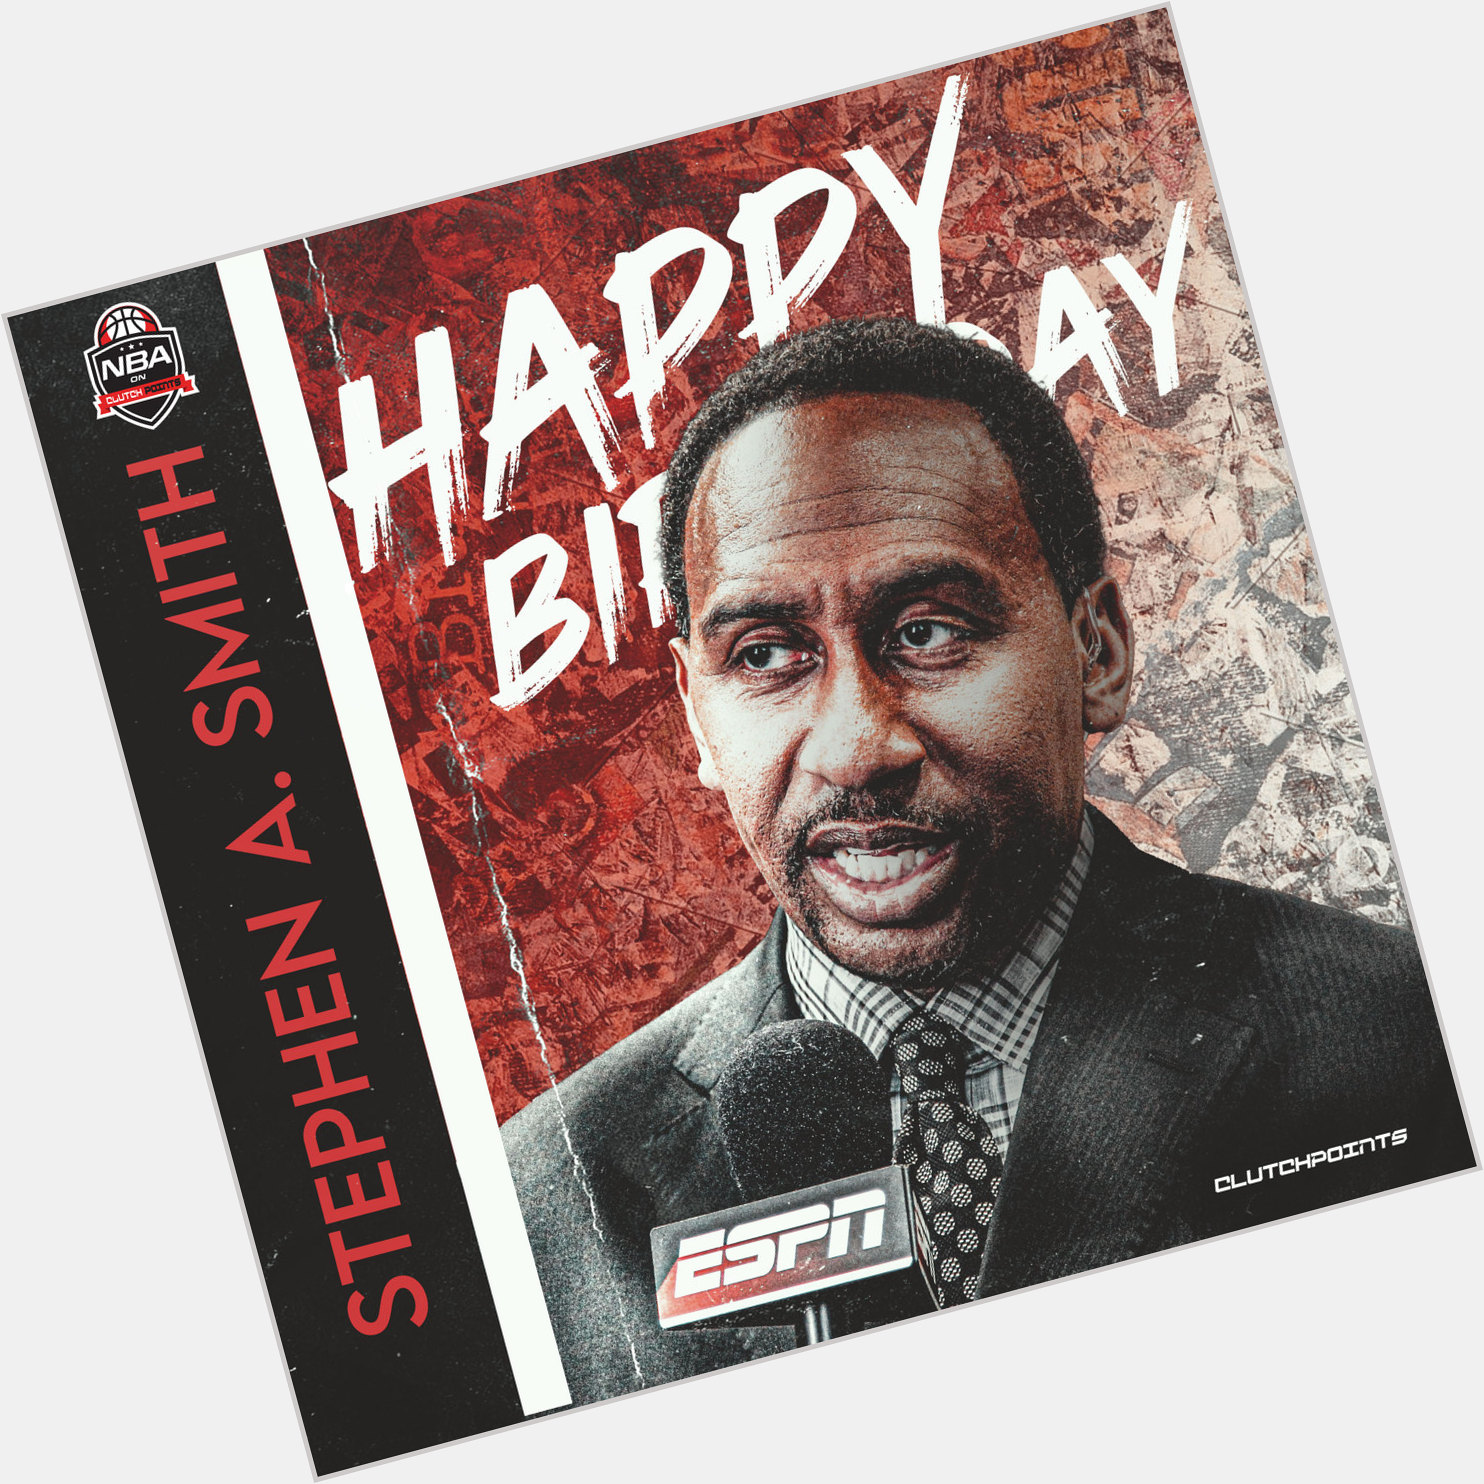 The man with the hottest takes in the land turns 54 today.

Happy birthday, Stephen A. Smith 